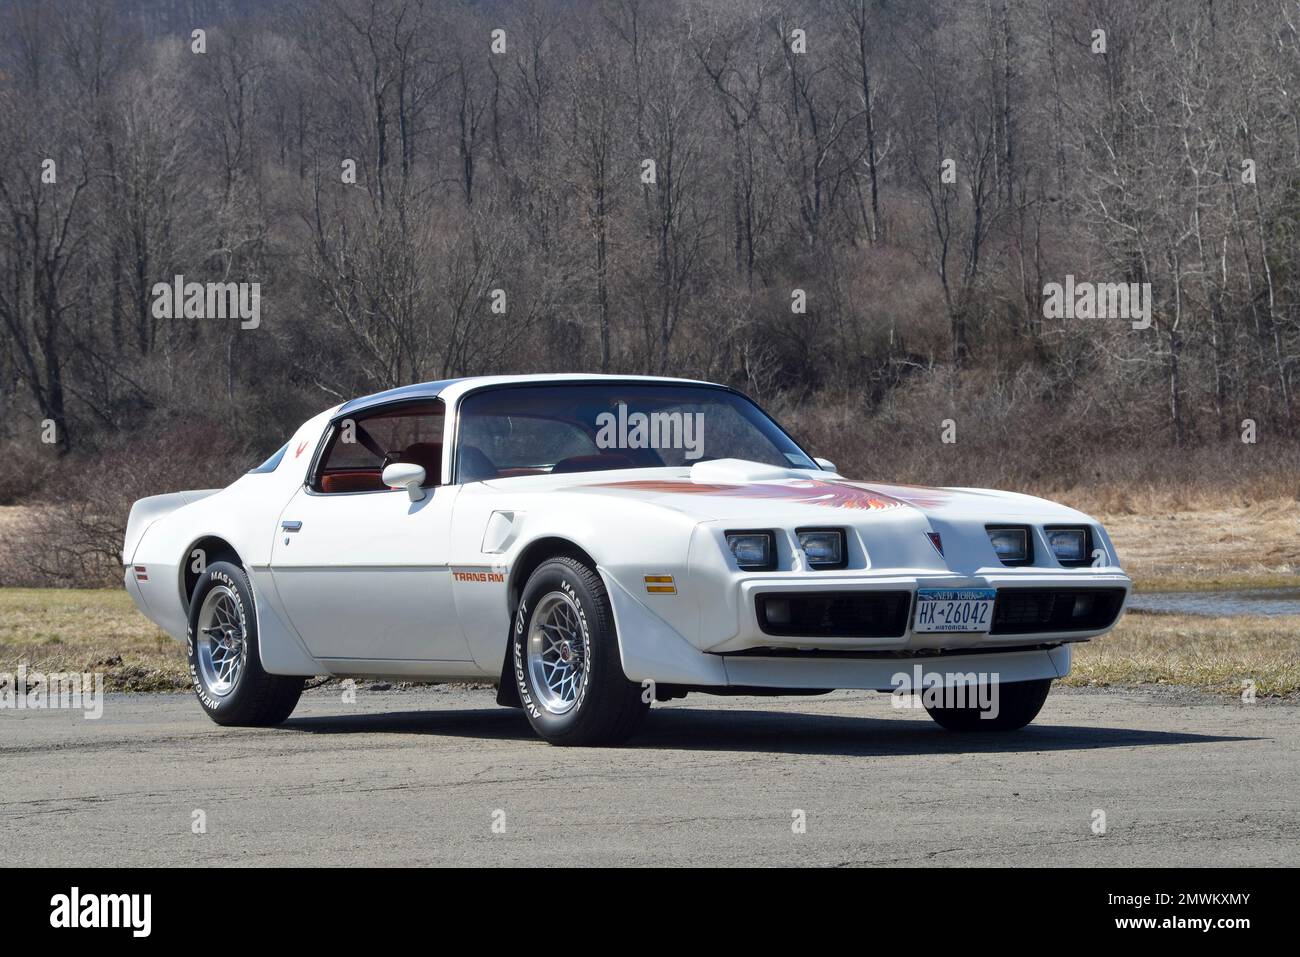 White 1979 Pontiac Trans Am in a low-three-quarter-front view against winter trees in bright sun. Stock Photo